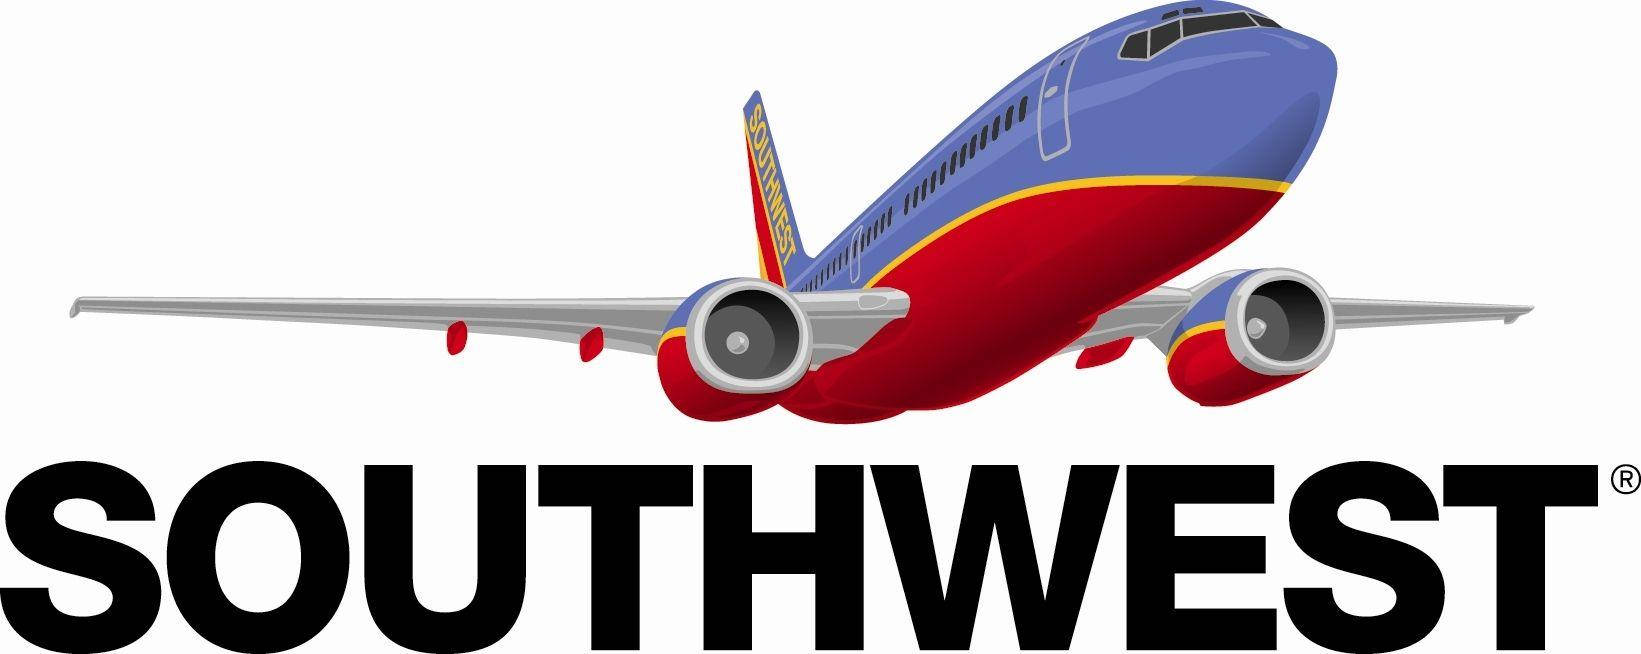 Southwest Airlines Simple Wallpaper